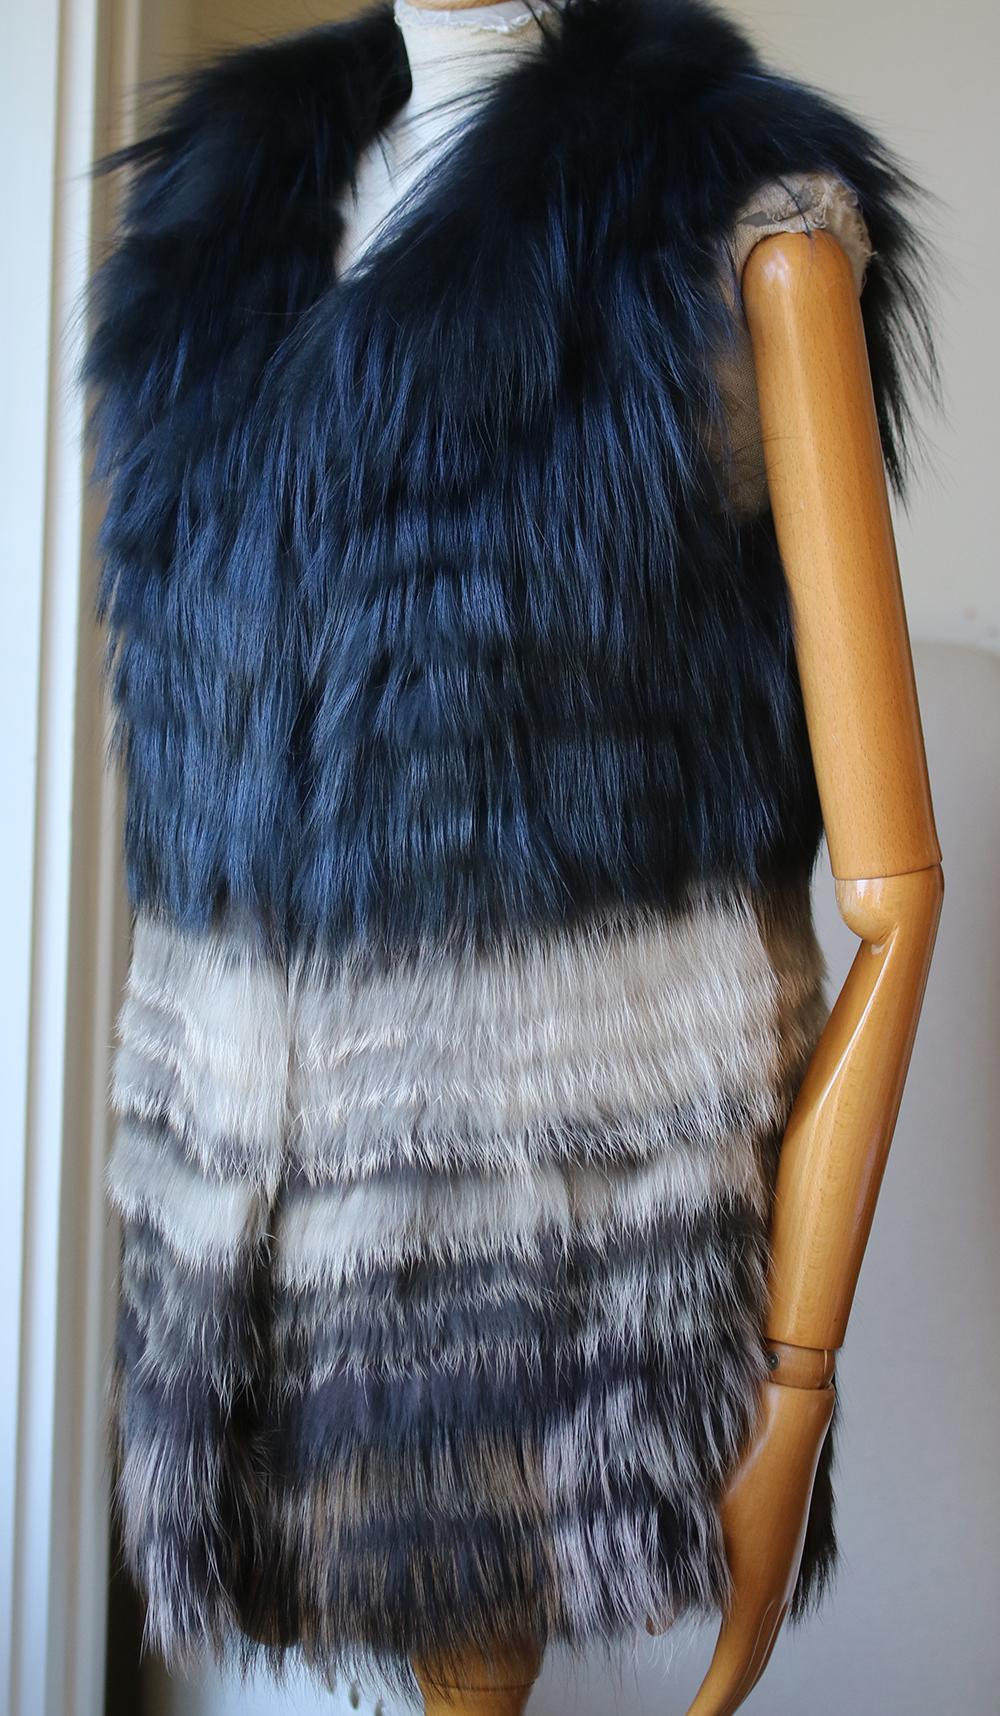 100% dyed fox fur. Fur origin: Finland. Dyed fur. Hook and bar front closures. Side slit pockets.

Size: Medium (UK 10, US 6, FR 38, IT 42) 

Condition: As new condition, no sign of wear. 